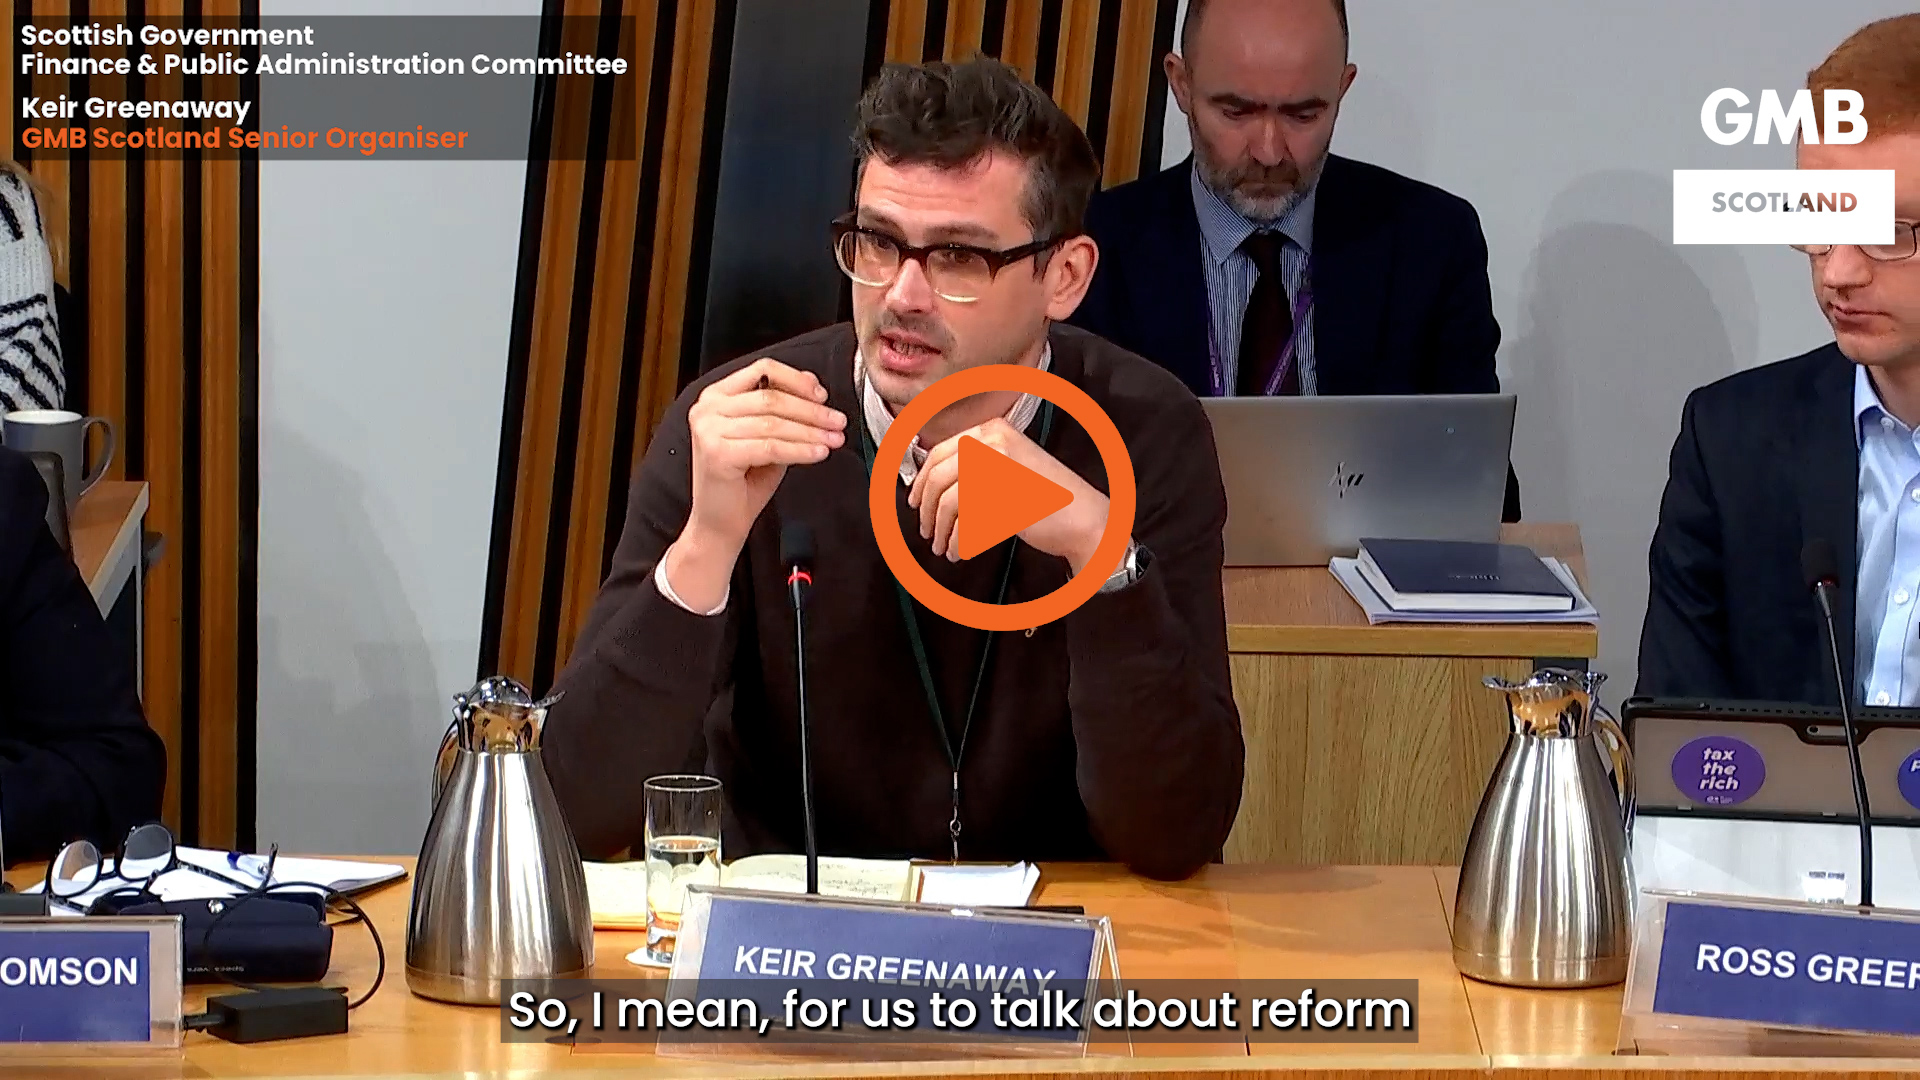 Keir Greenaway, GMB Scotland Senior Organiser speaking today at the Scottish Governments Finance & Public Administration Committee